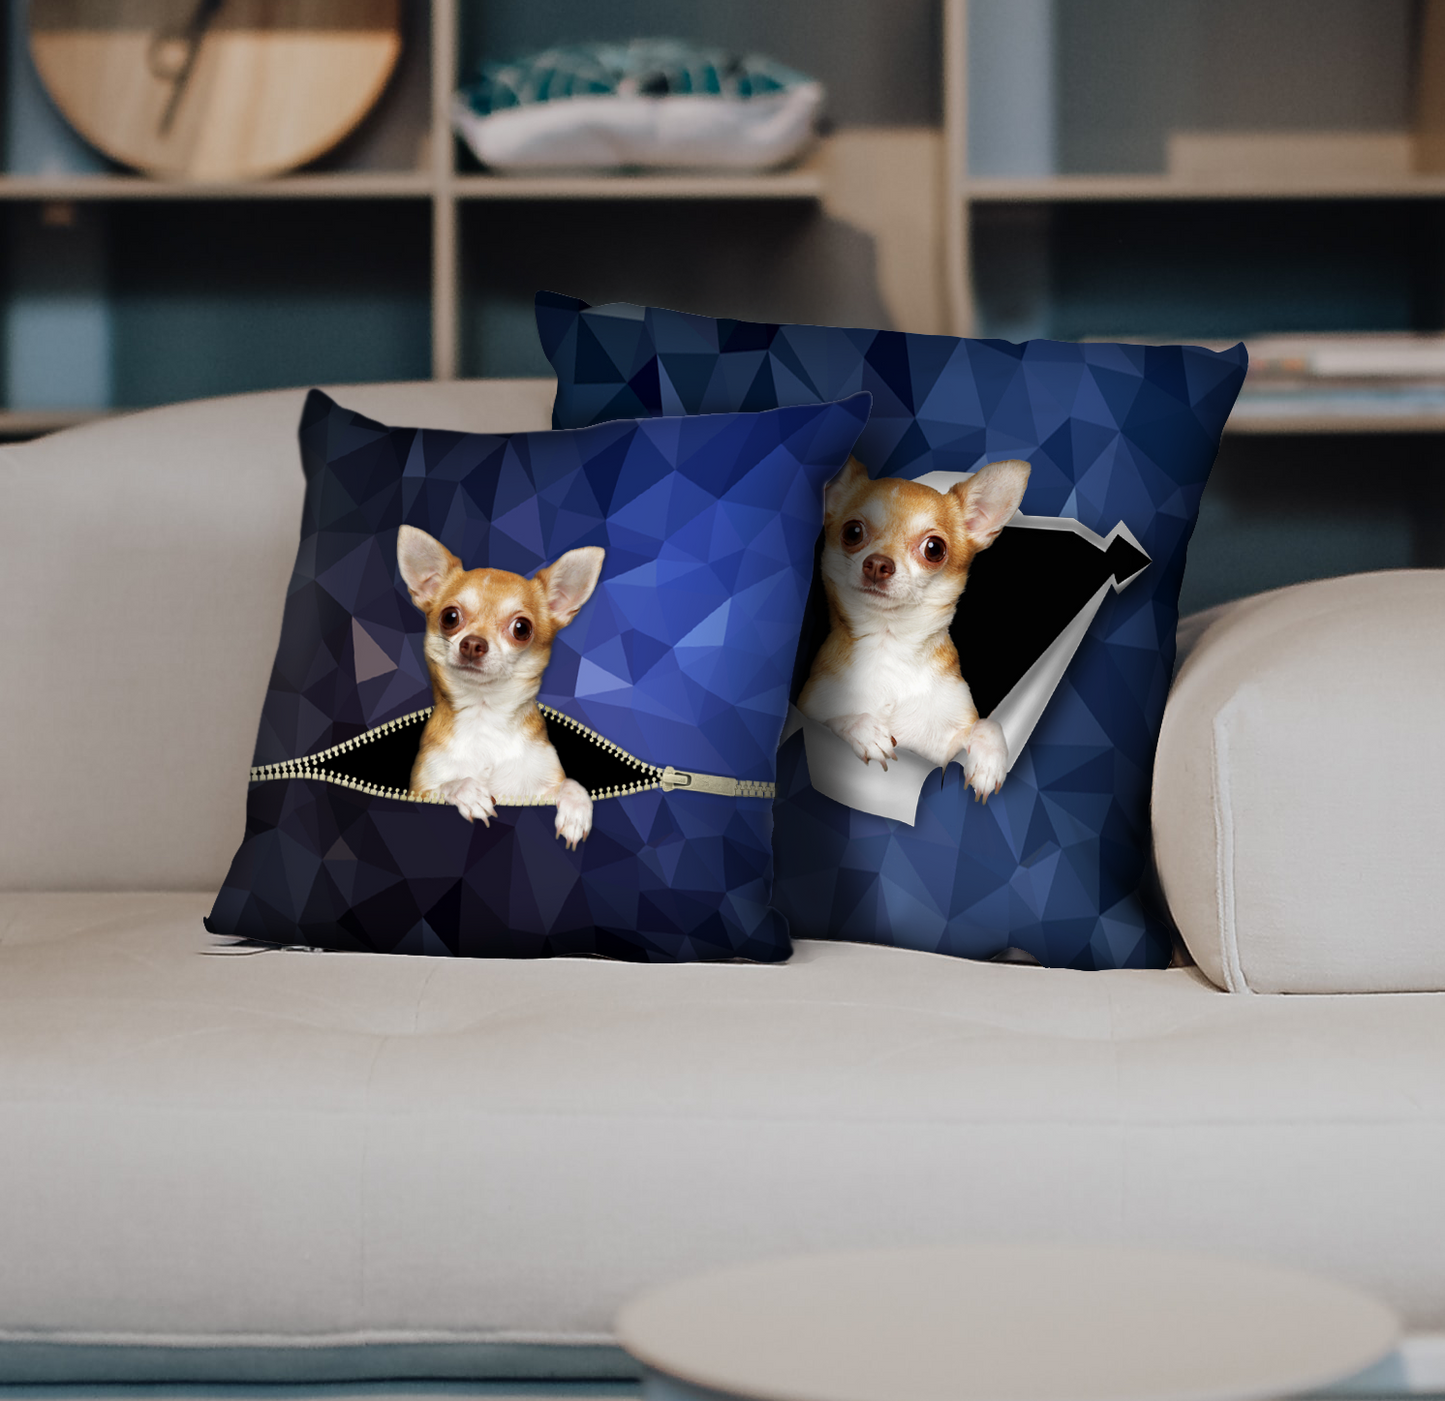 They Steal Your Couch - Chihuahua Pillow Cases V4 (Set of 2)